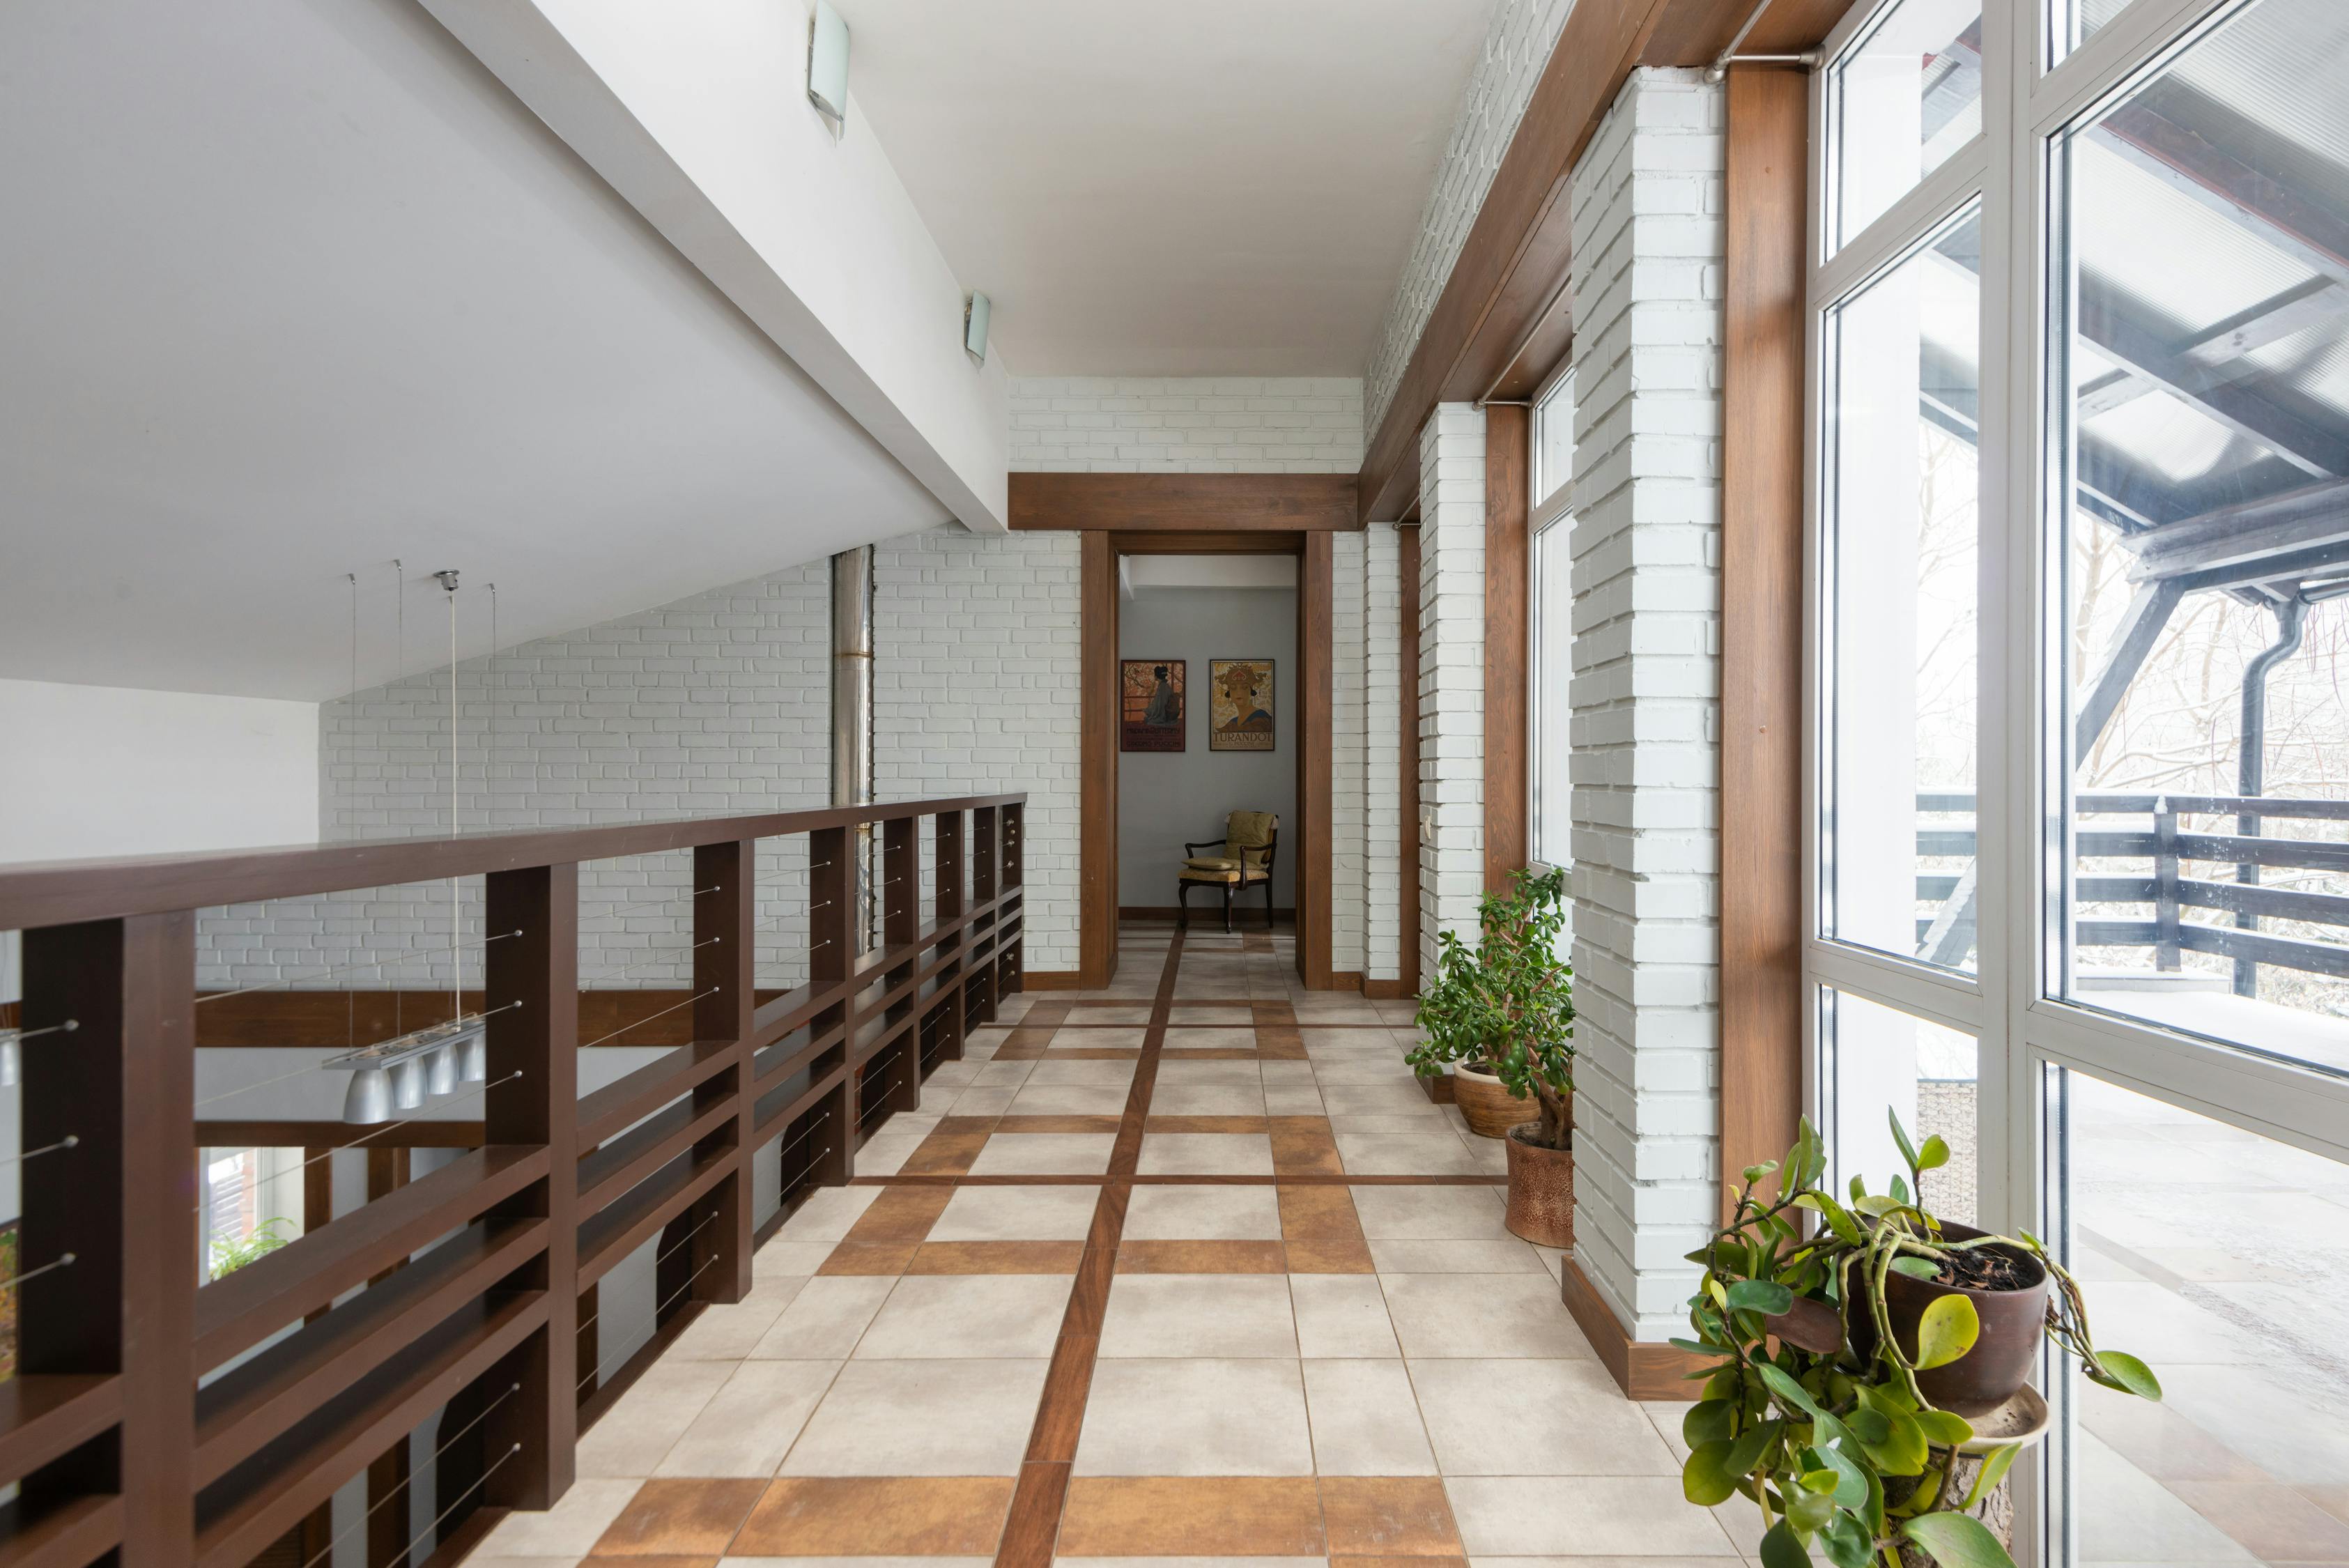 Corridor of modern apartment with fence · Free Stock Photo